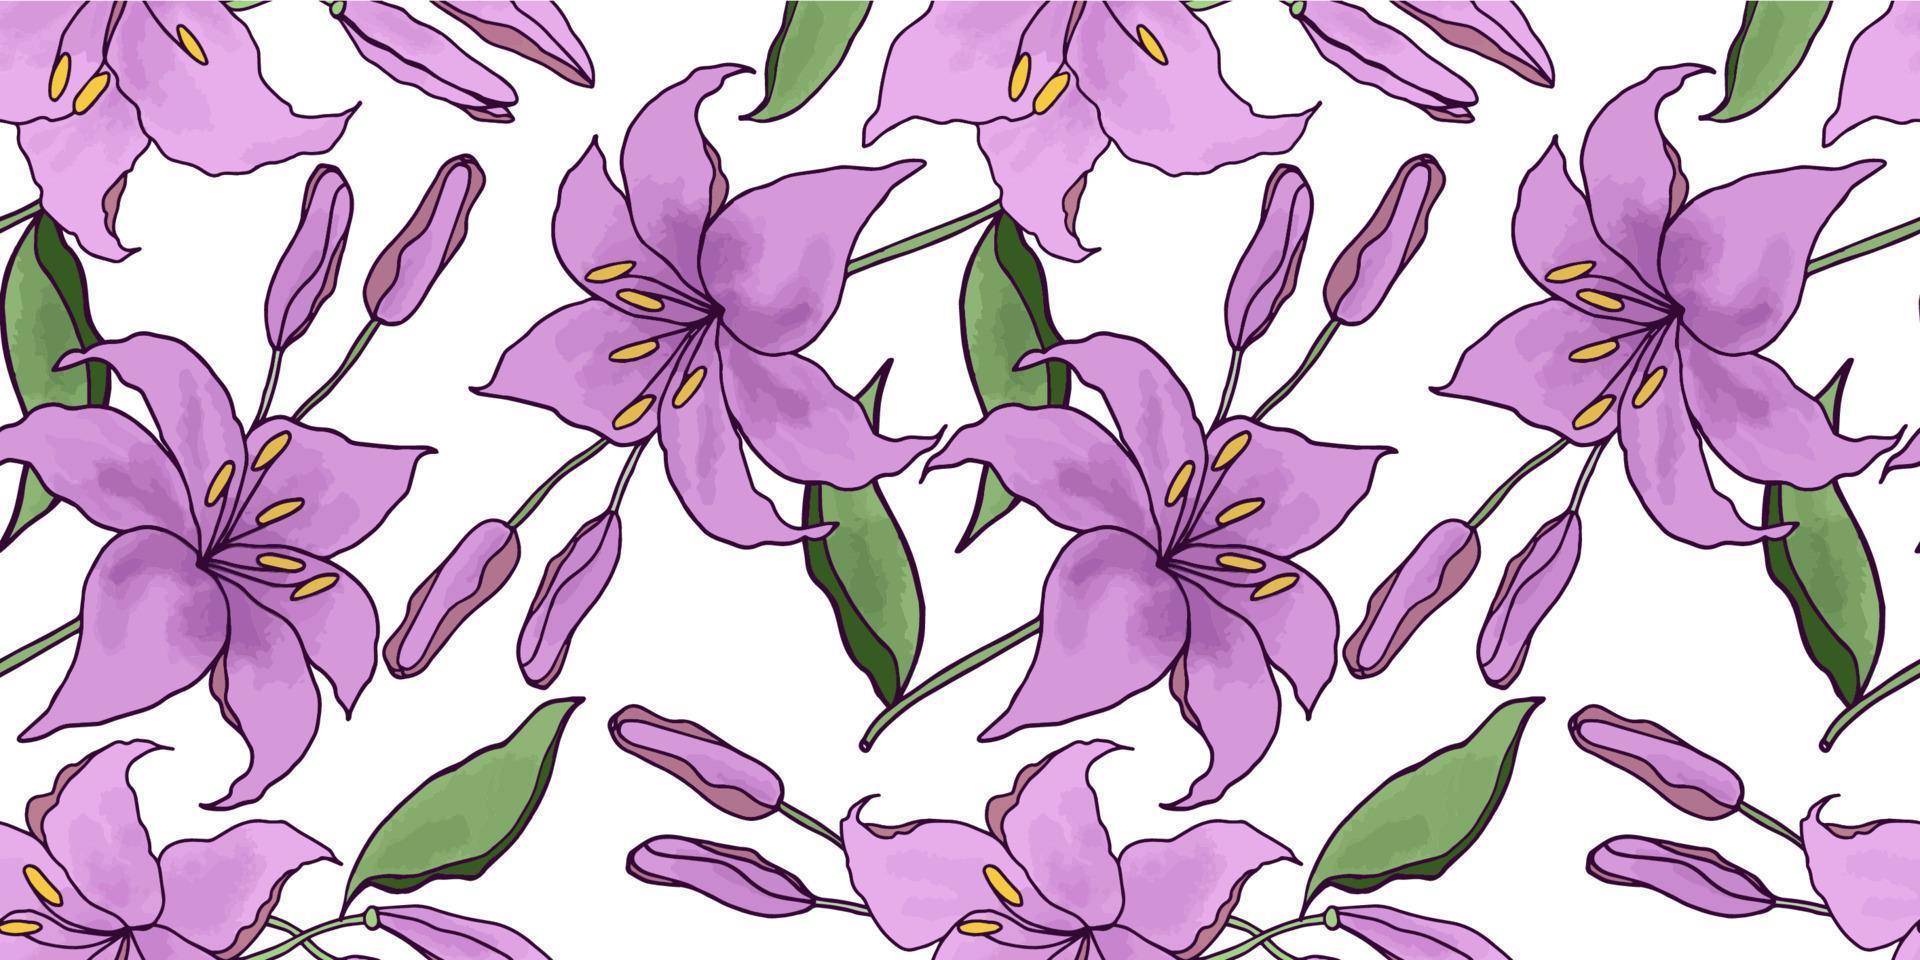 Lilly hand drawn flower vector